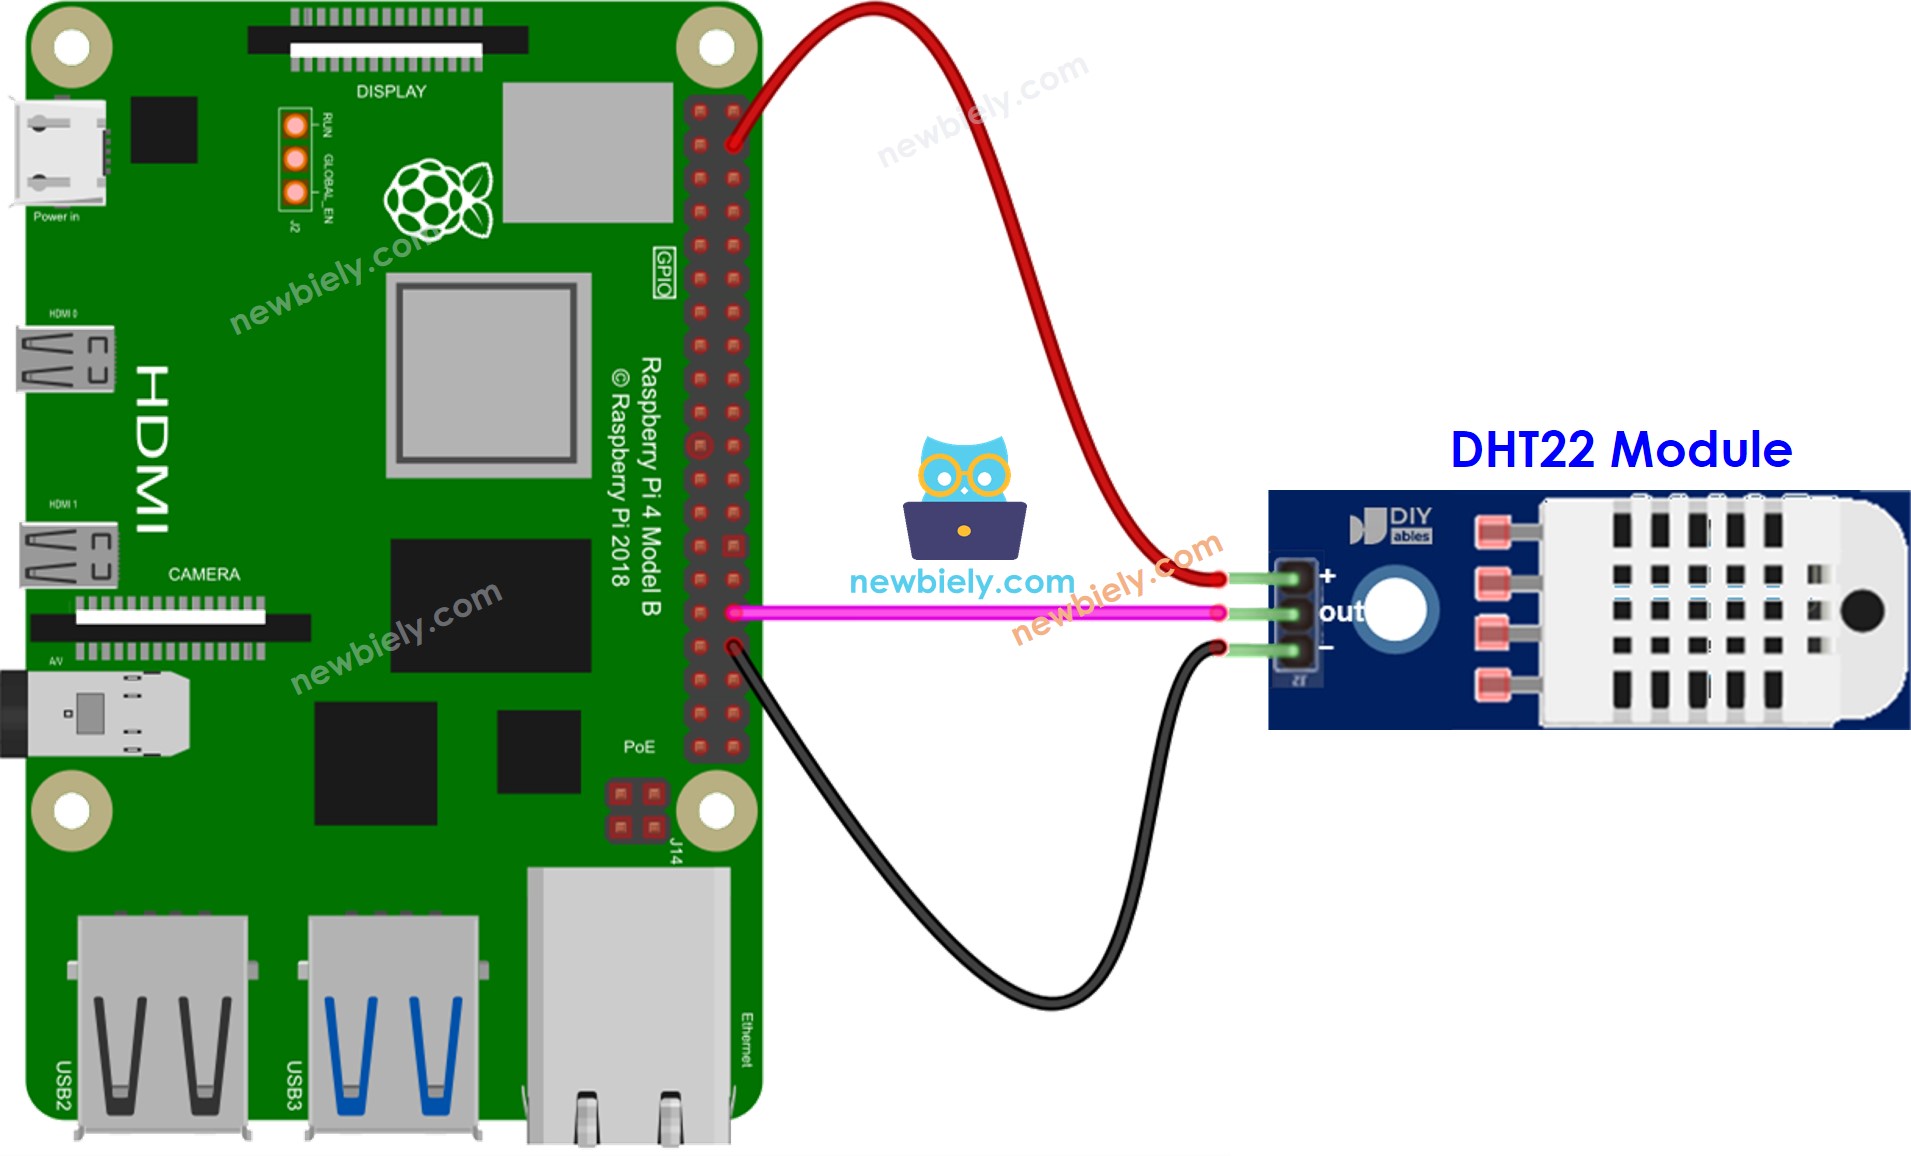 The wiring diagram between Raspberry Pi and DHT22 Temperature and humidity Module